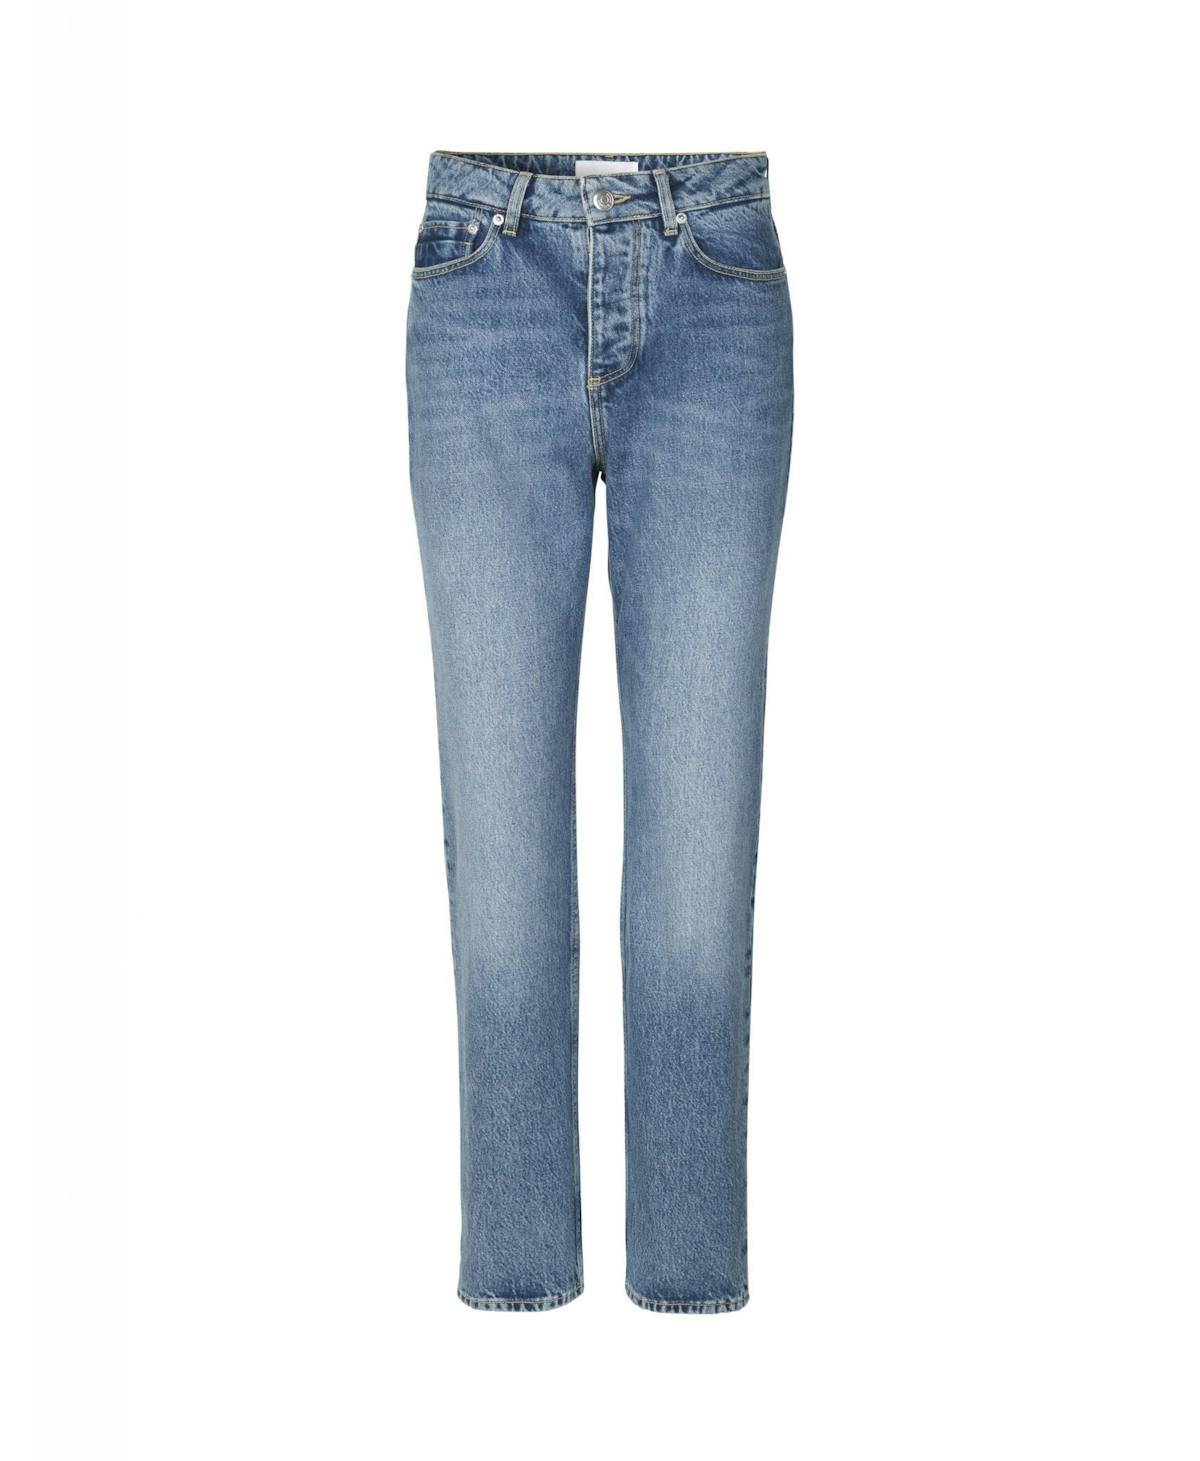 Best jeans for summer: Where to buy women’s jeans